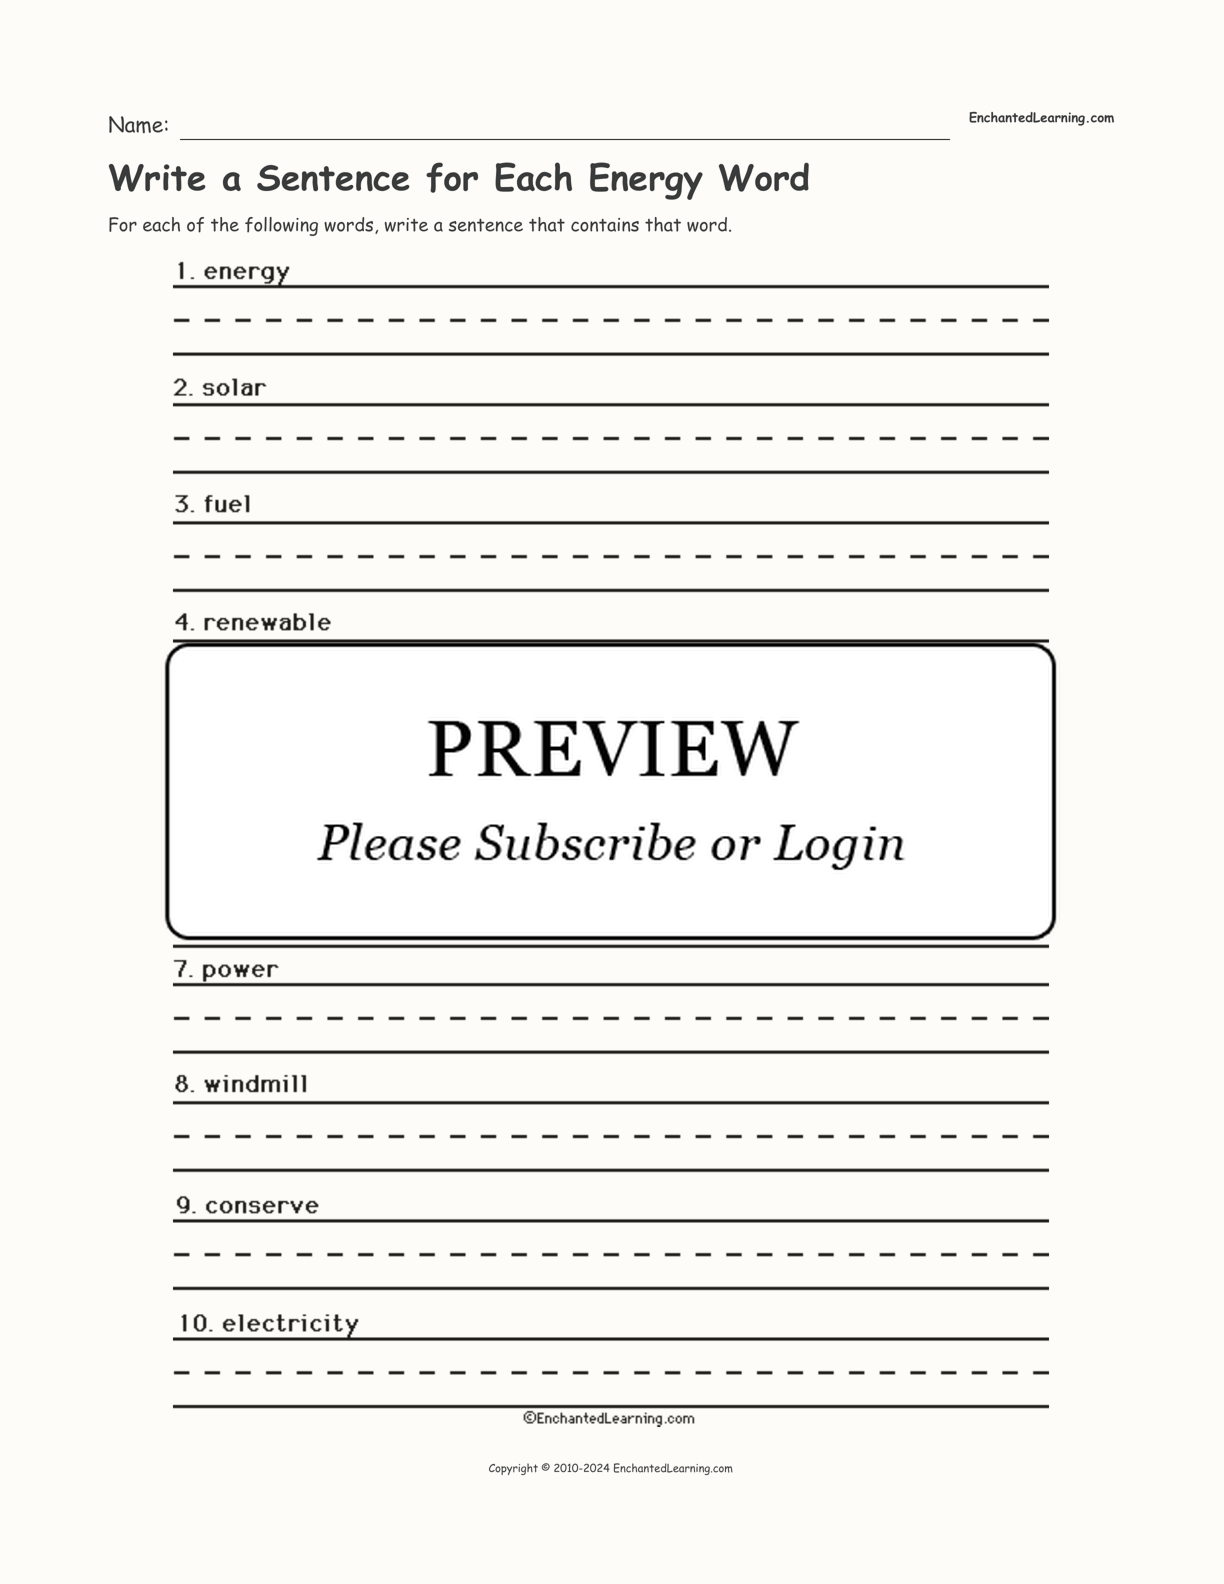 Write a Sentence for Each Energy Word interactive worksheet page 1